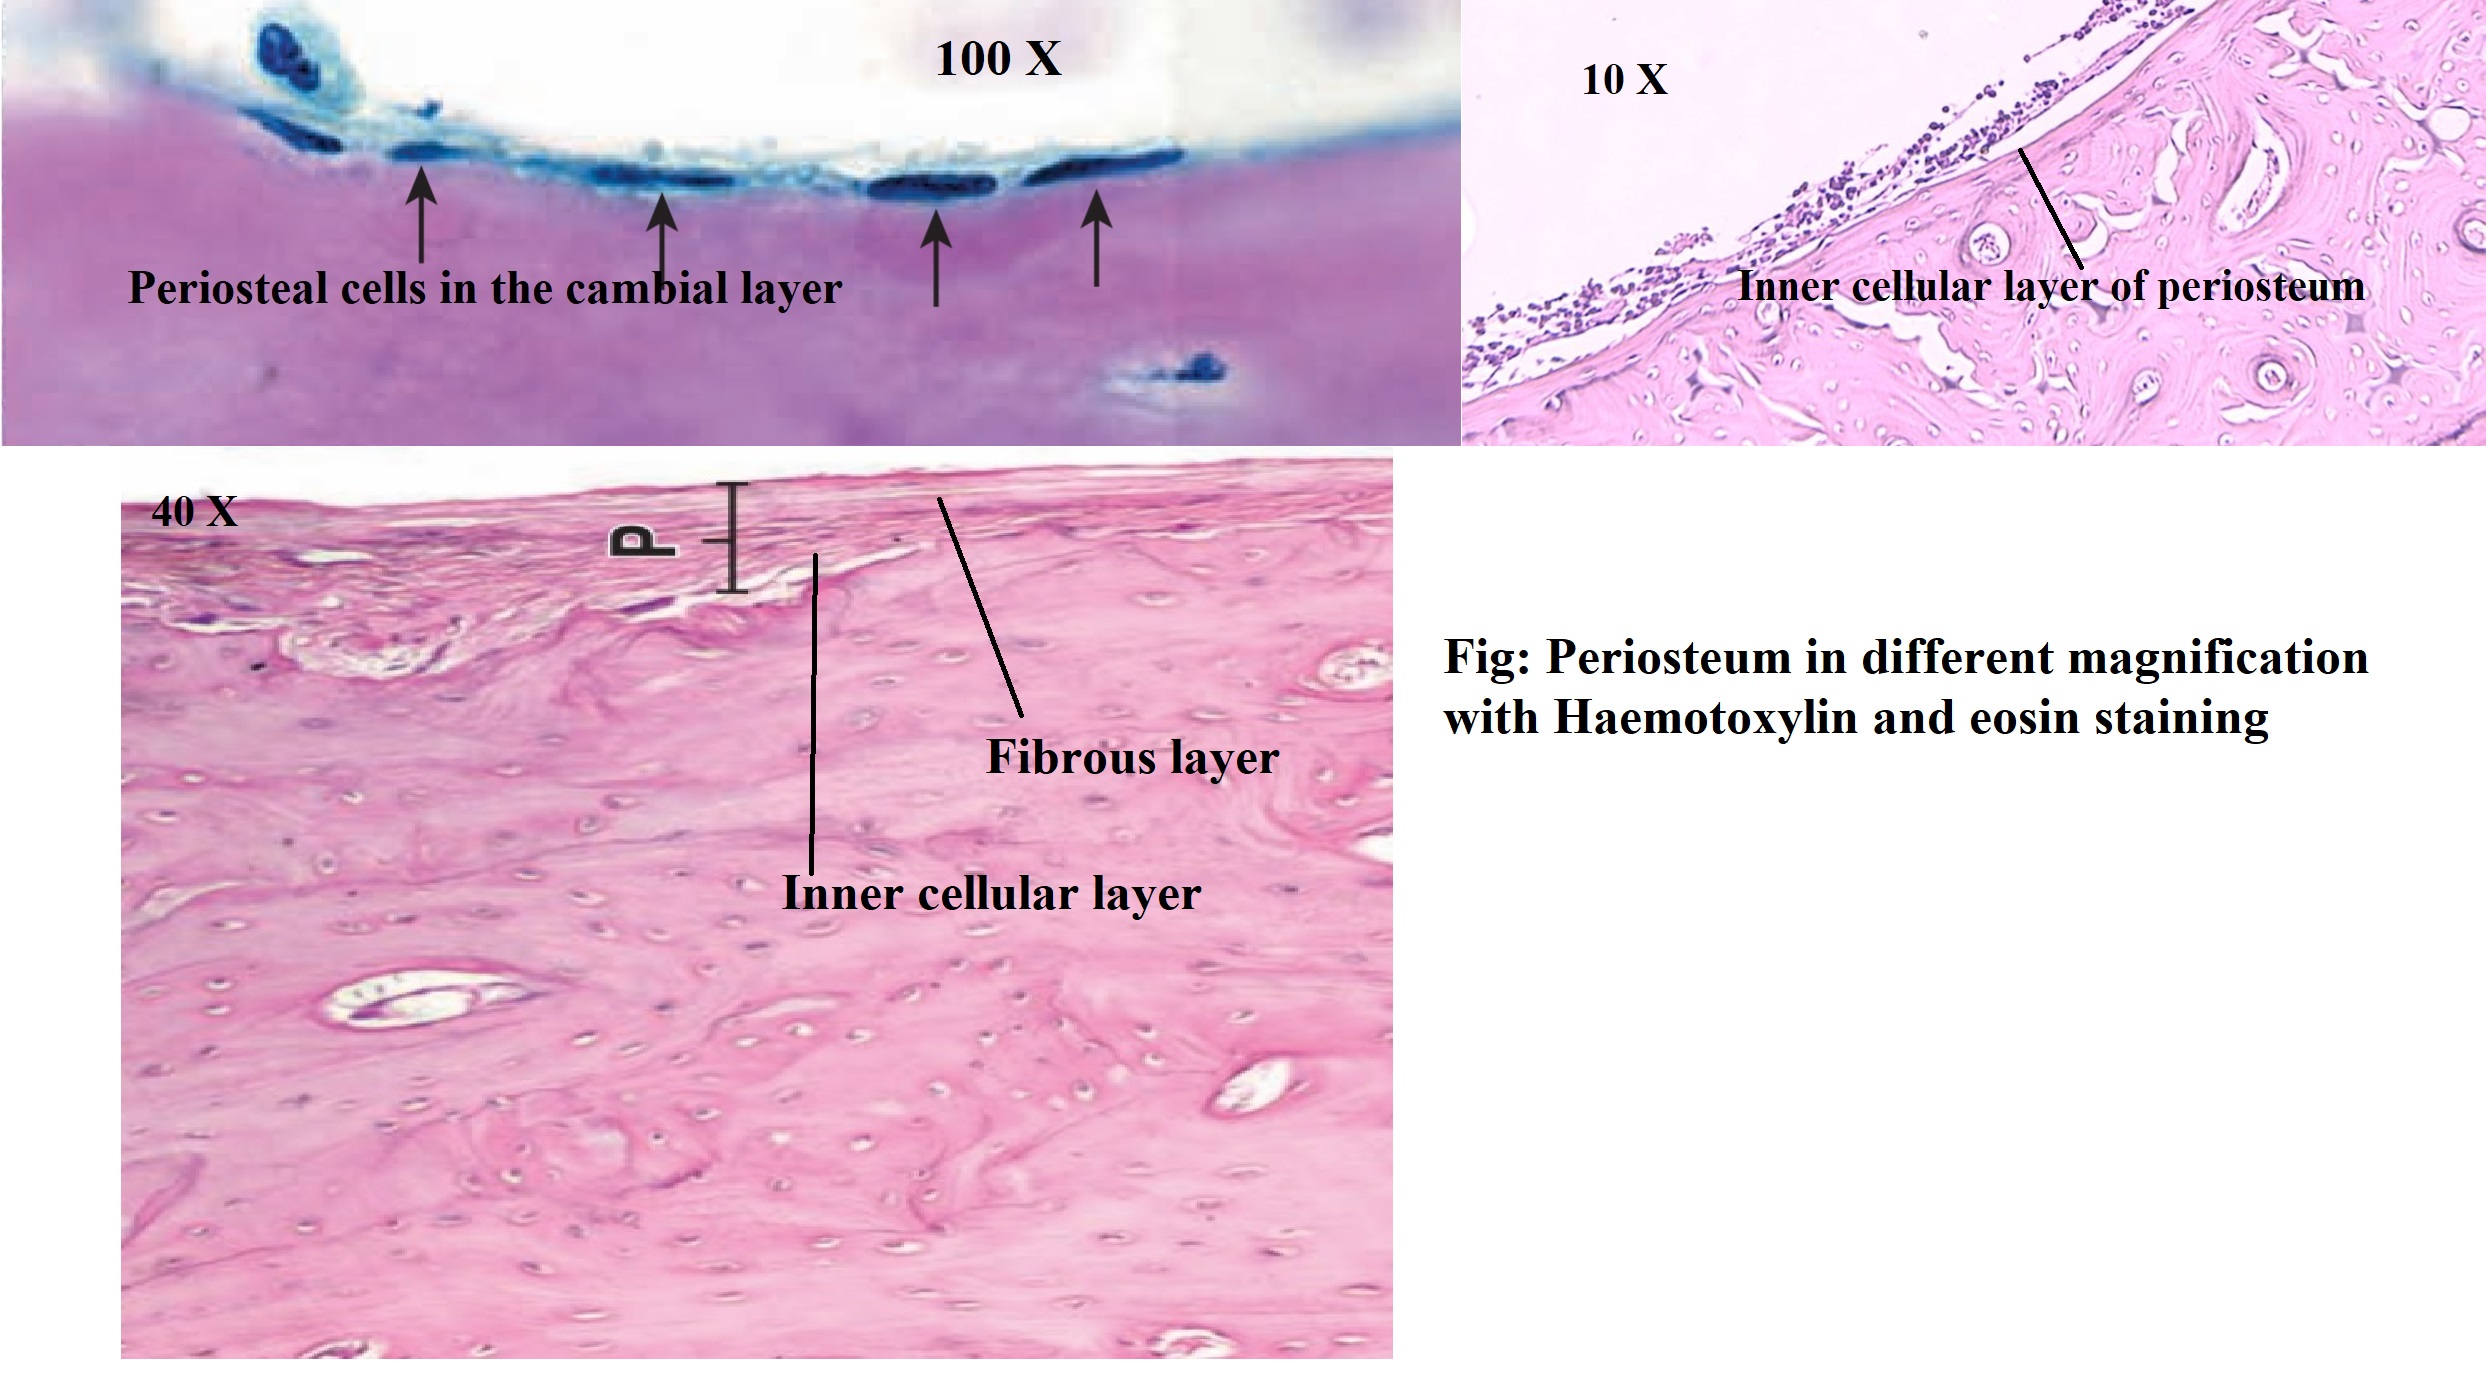 Periosteum under different magnification power (H & E stain)